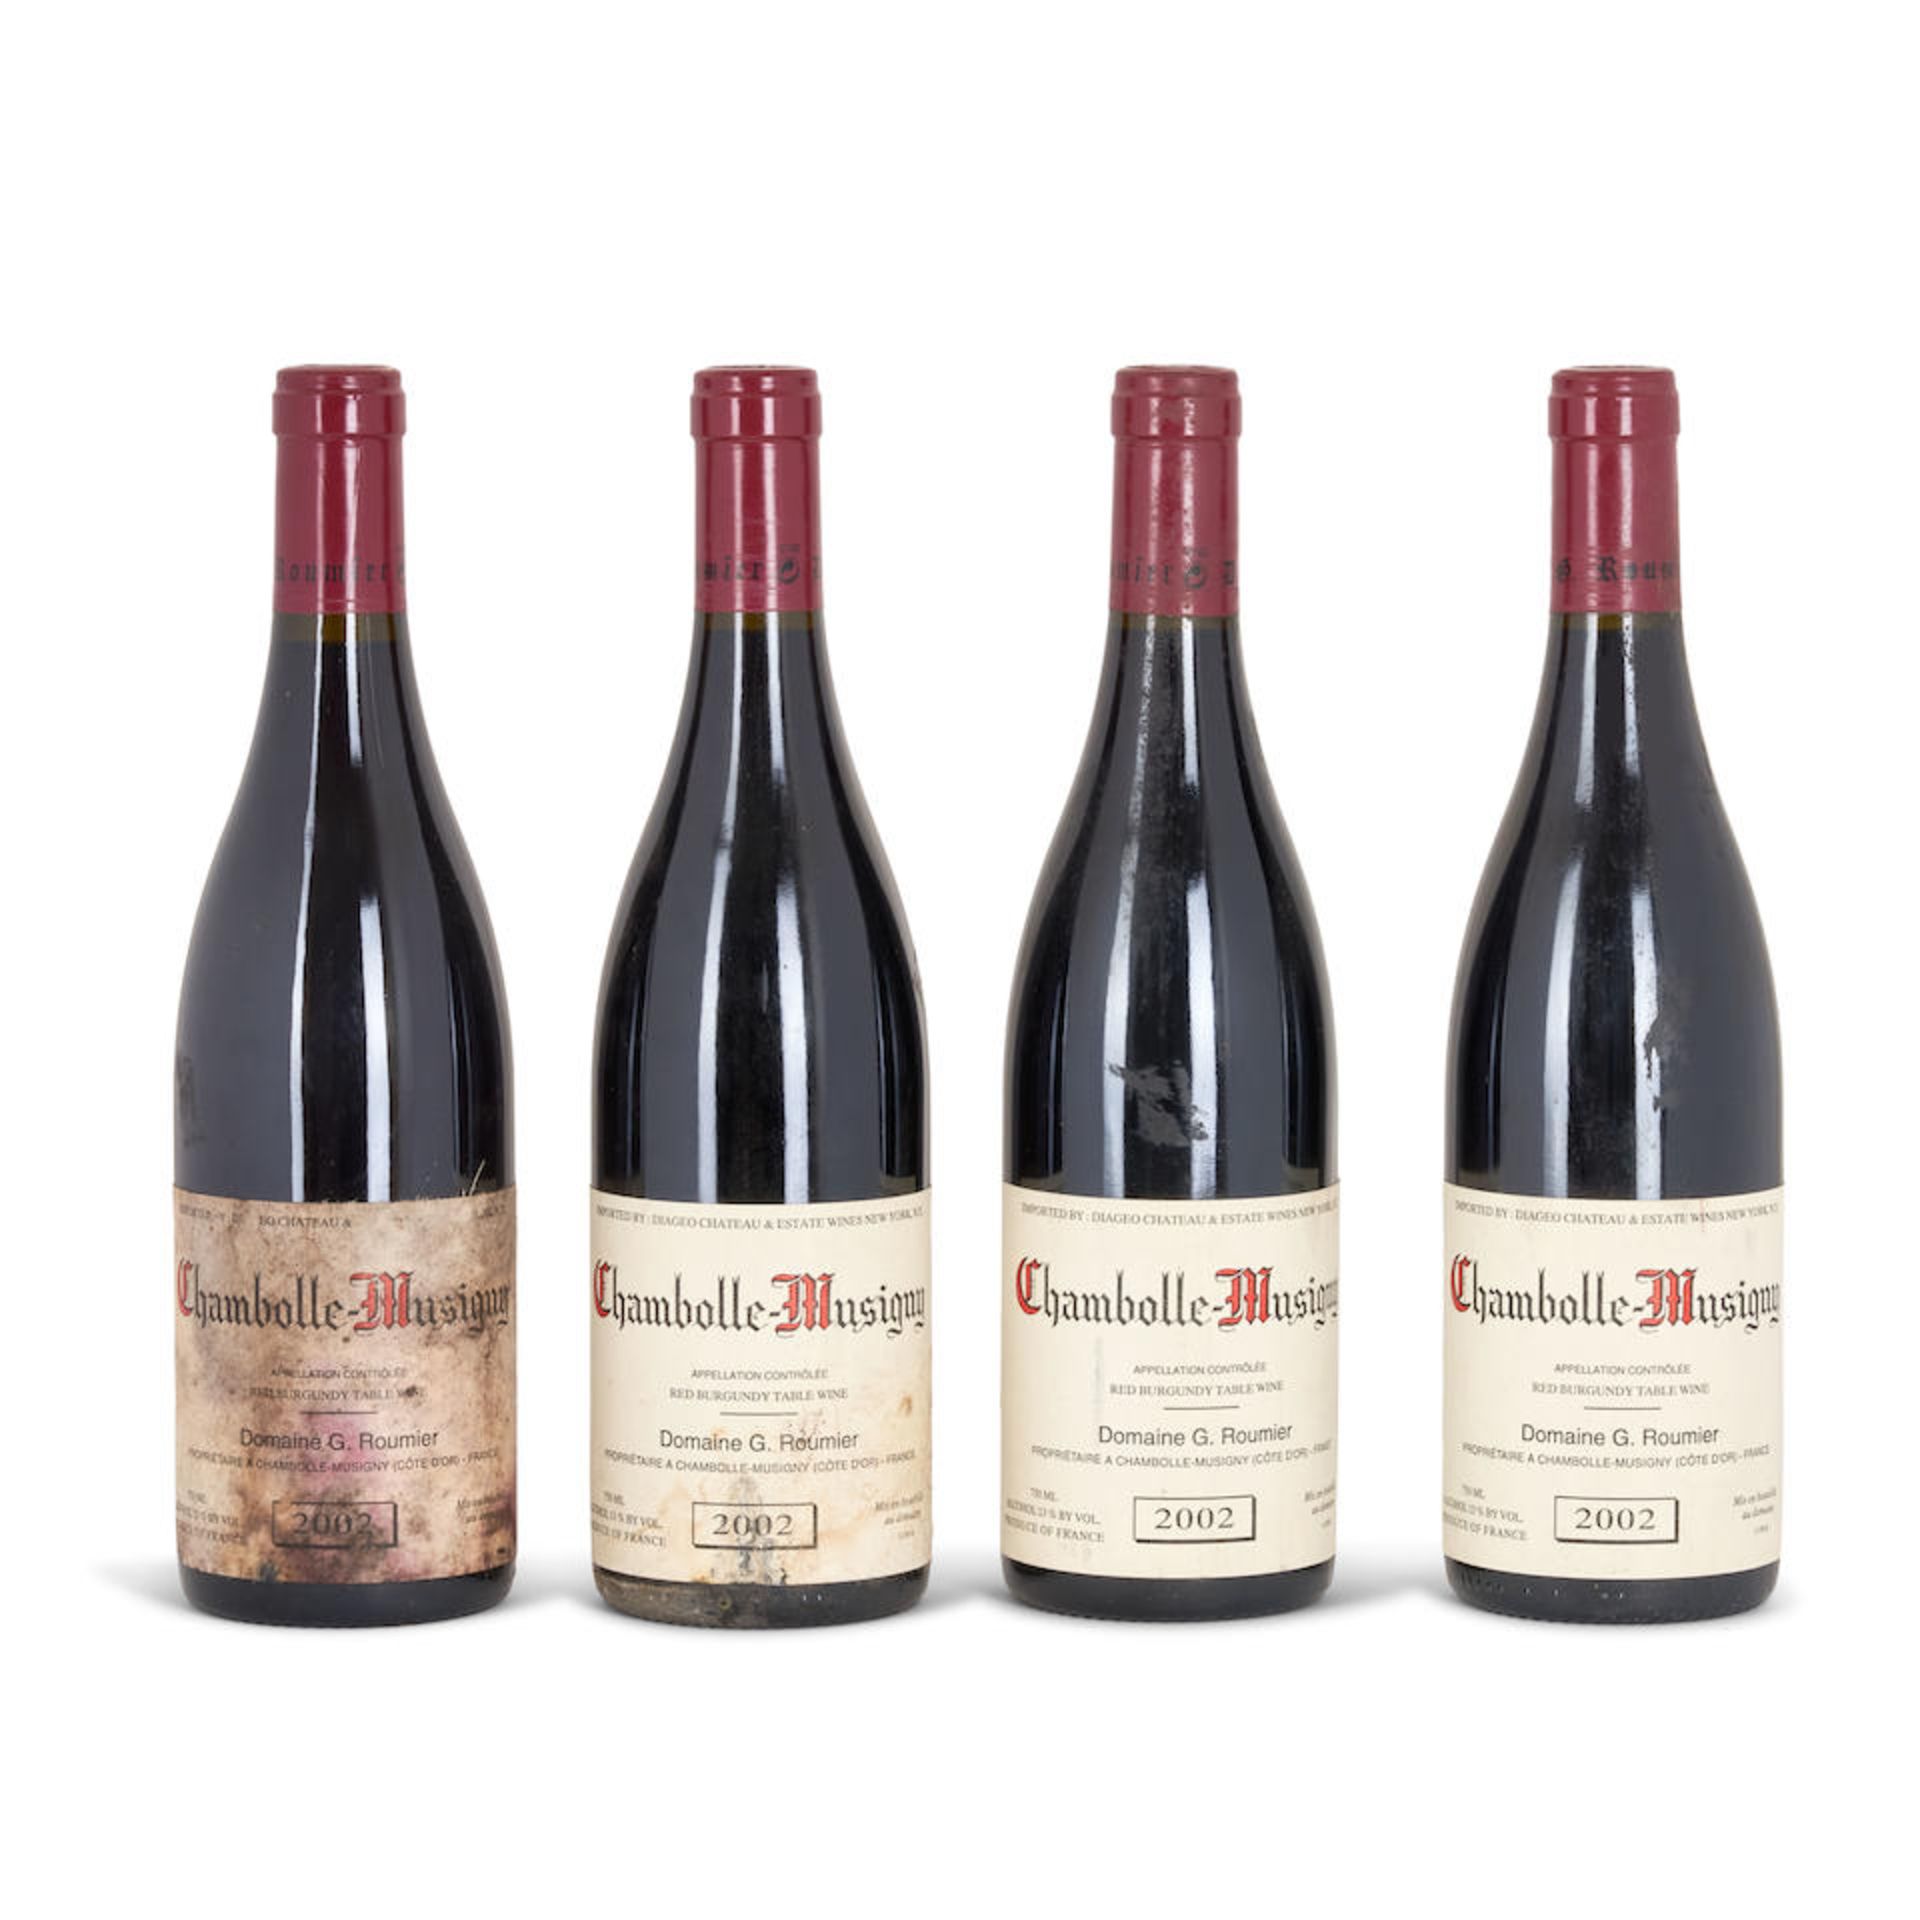 G. Roumier Chambolle Musigny 2002 (4 bottles)